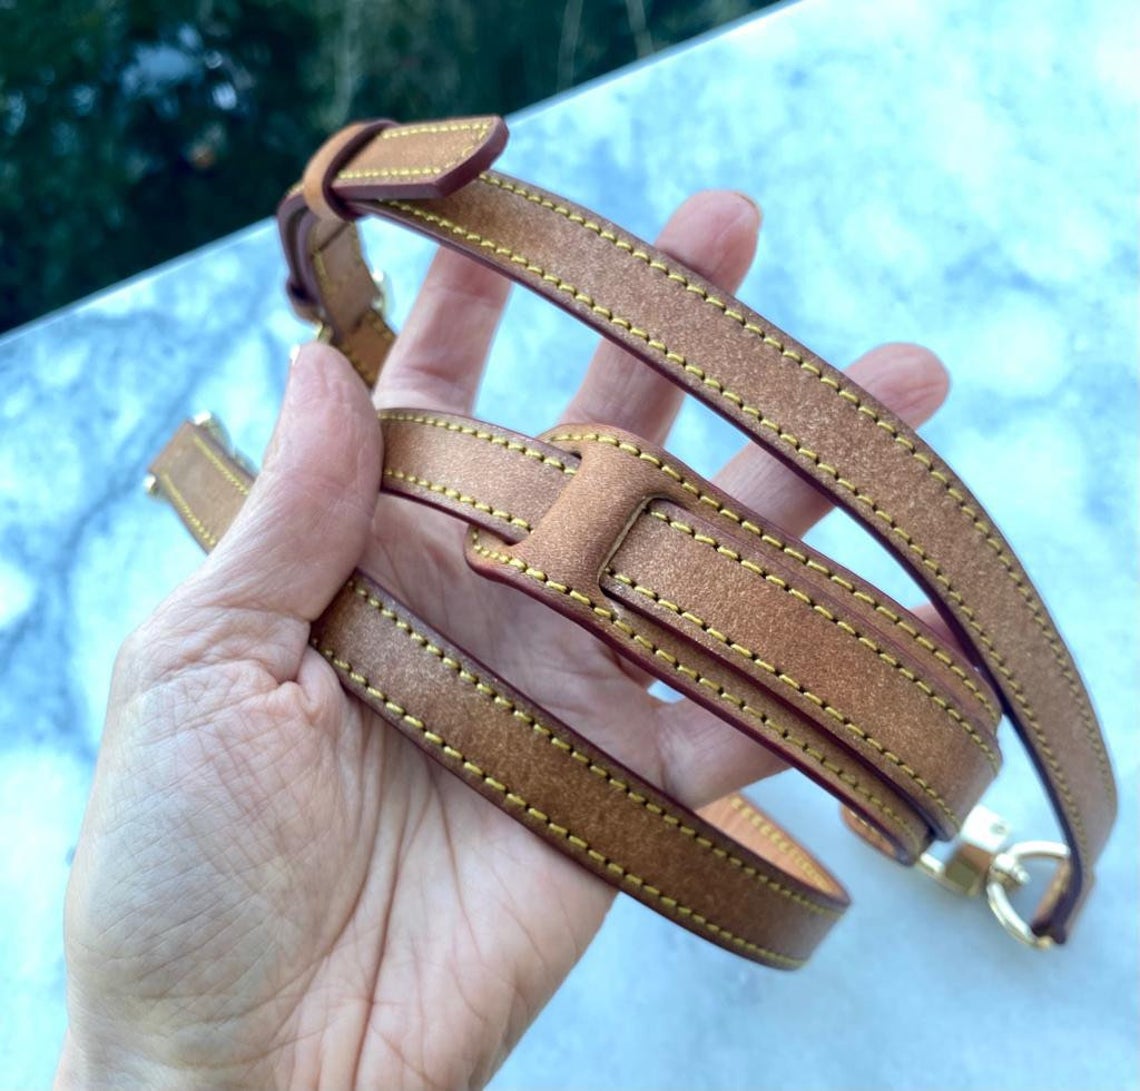 Vachetta Leather Adjustable Crossbody - Shoulder Pad - Real Vegetable Leather - Honey Tanning Handmade Patina - Strap for GM Vintage Bags